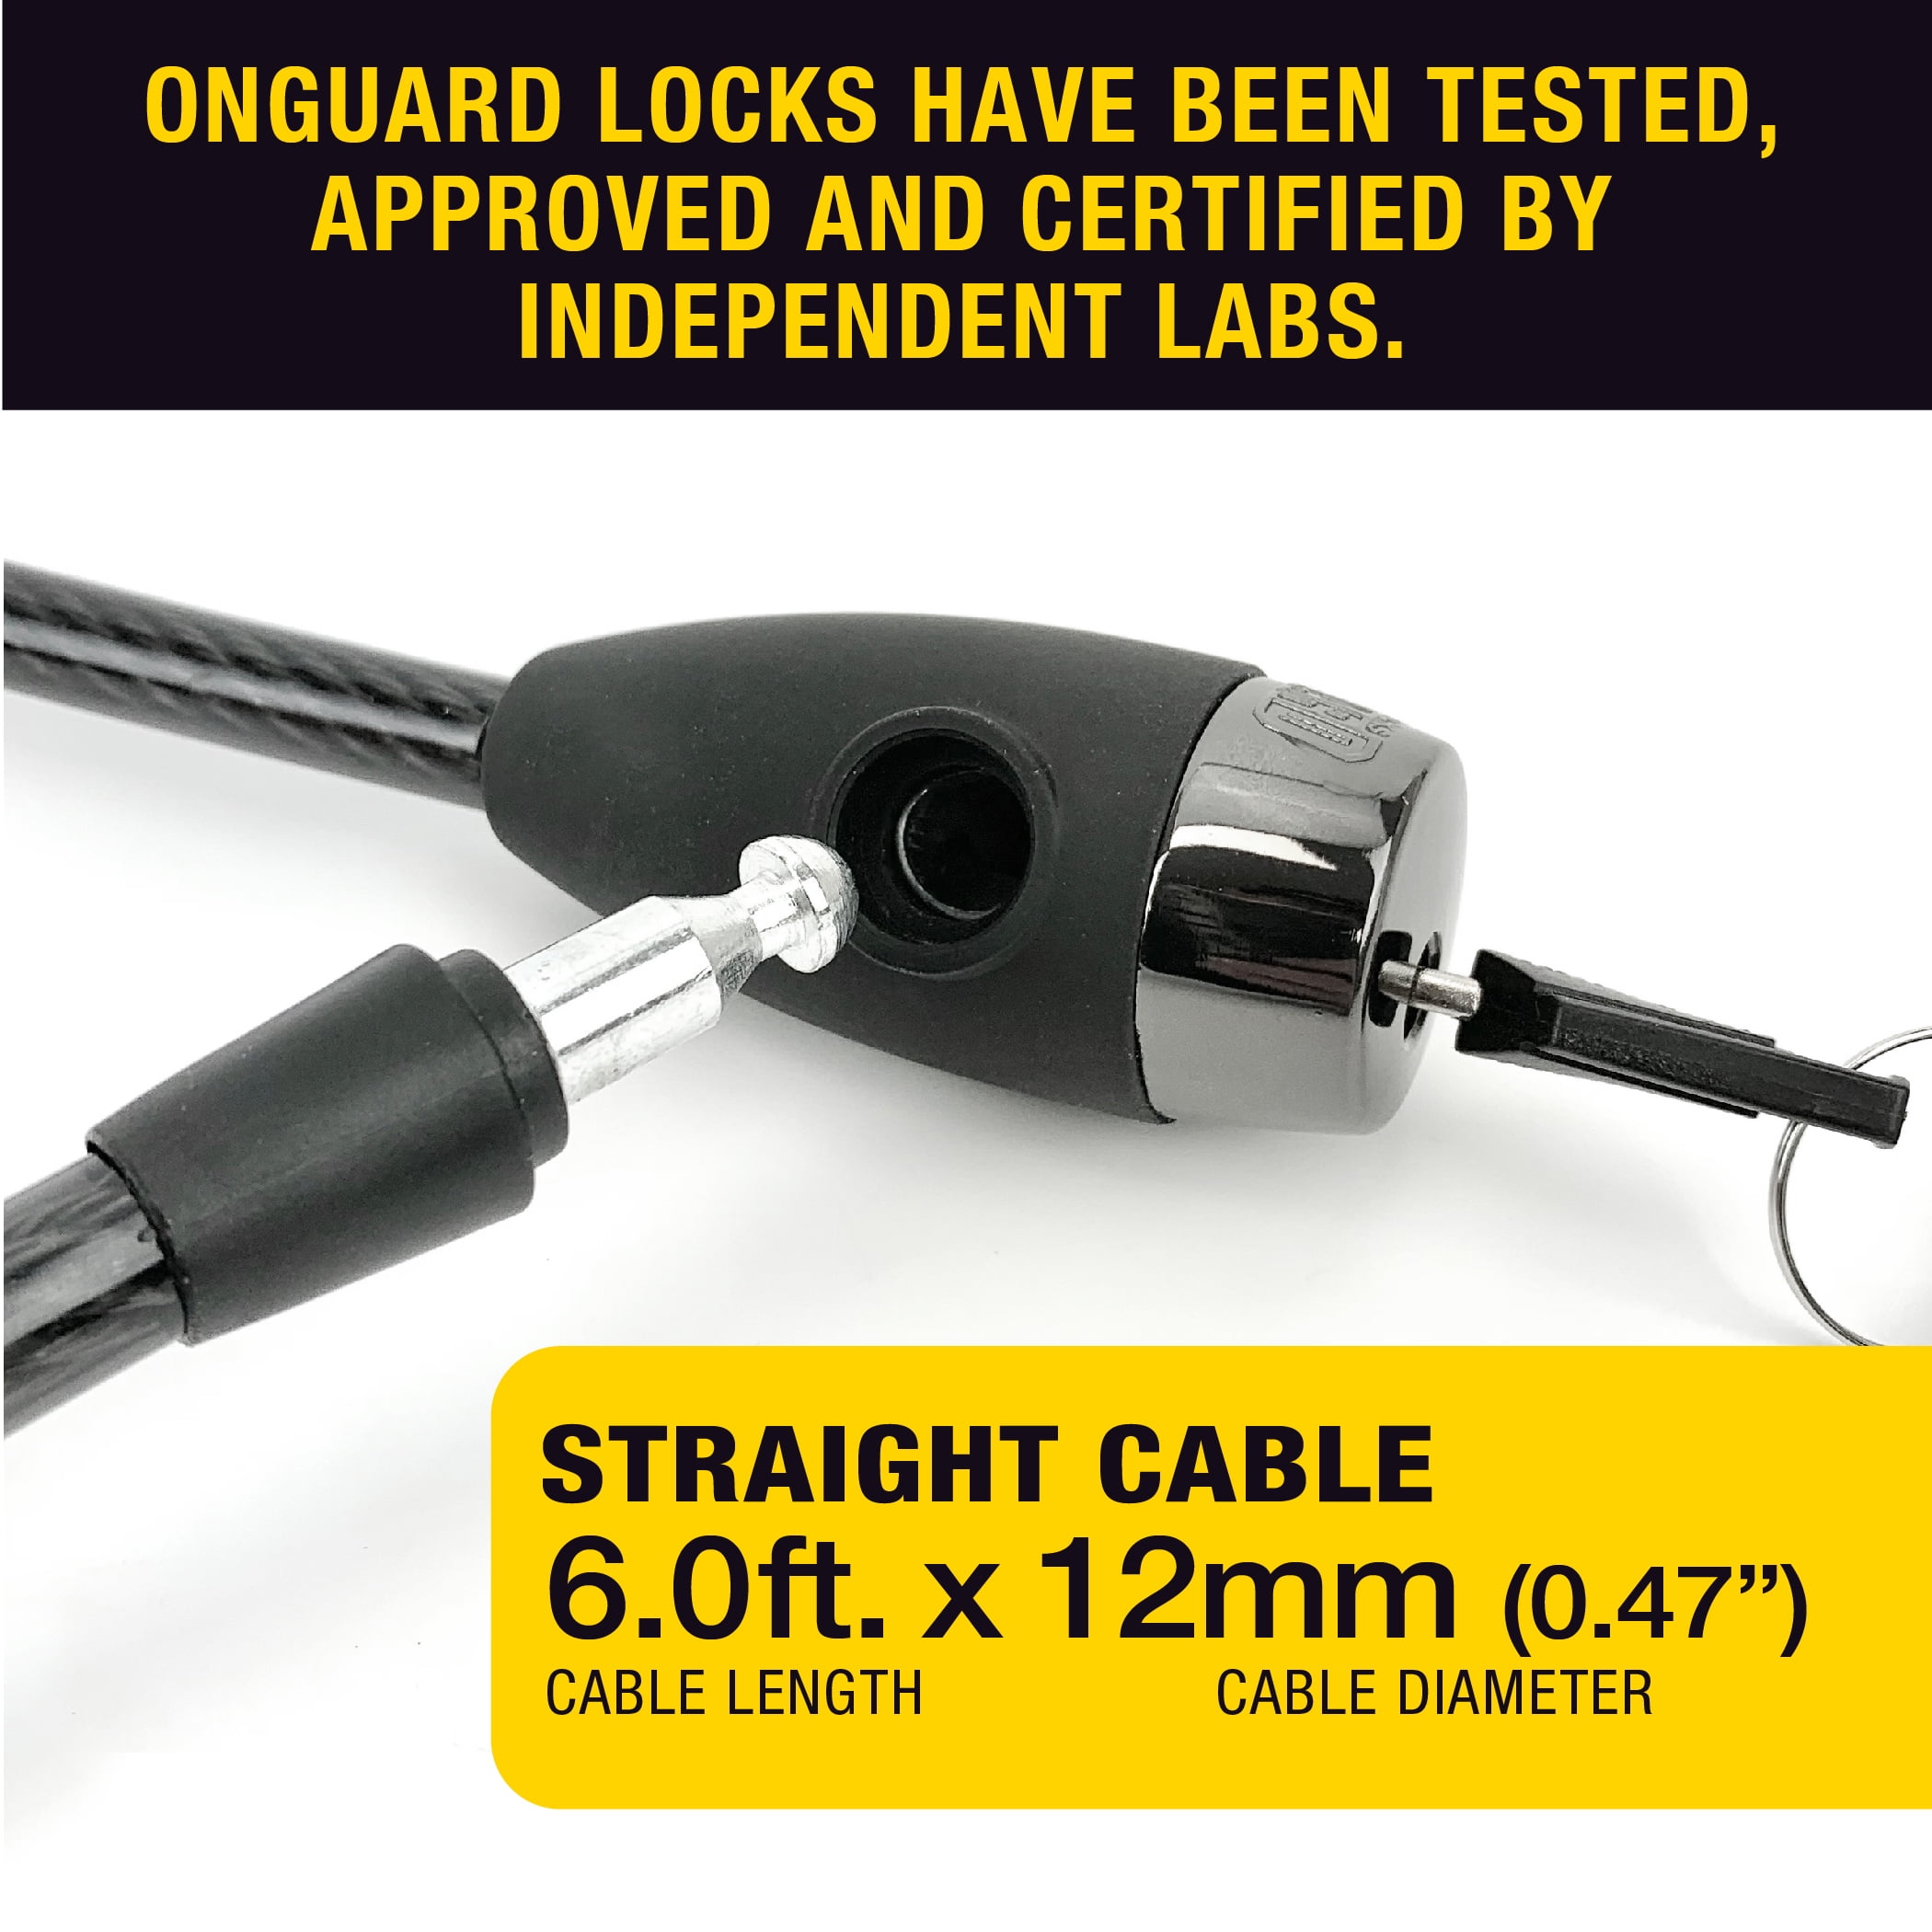 6ft length X 12mm Cable diameter. OnGuard Lock 6' Straight Cable Light-up Key 